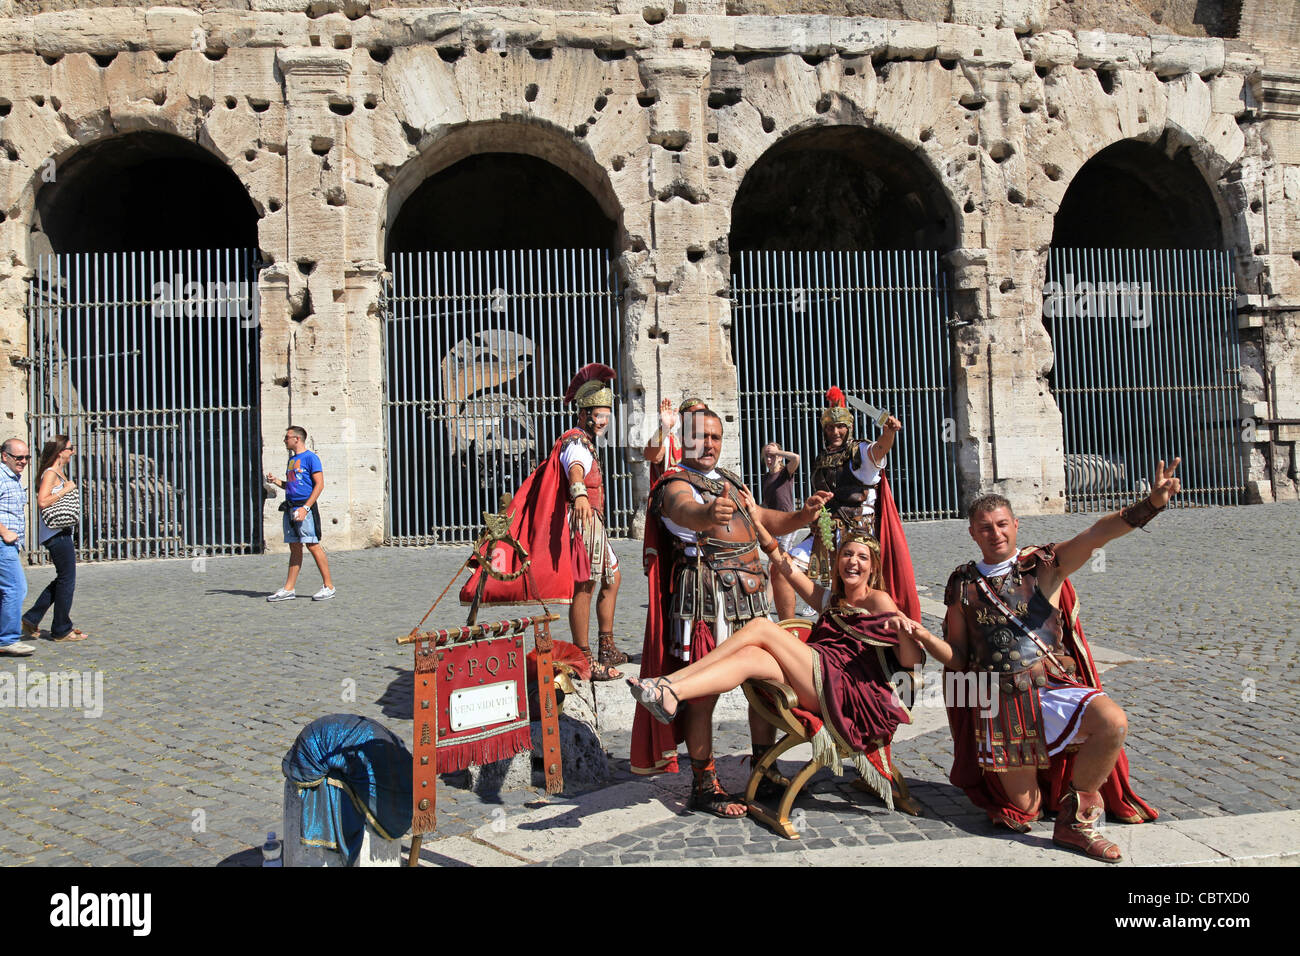 Street performers dressed as ancient Roman soldiers in front of the Coliseum, Rome Stock Photo